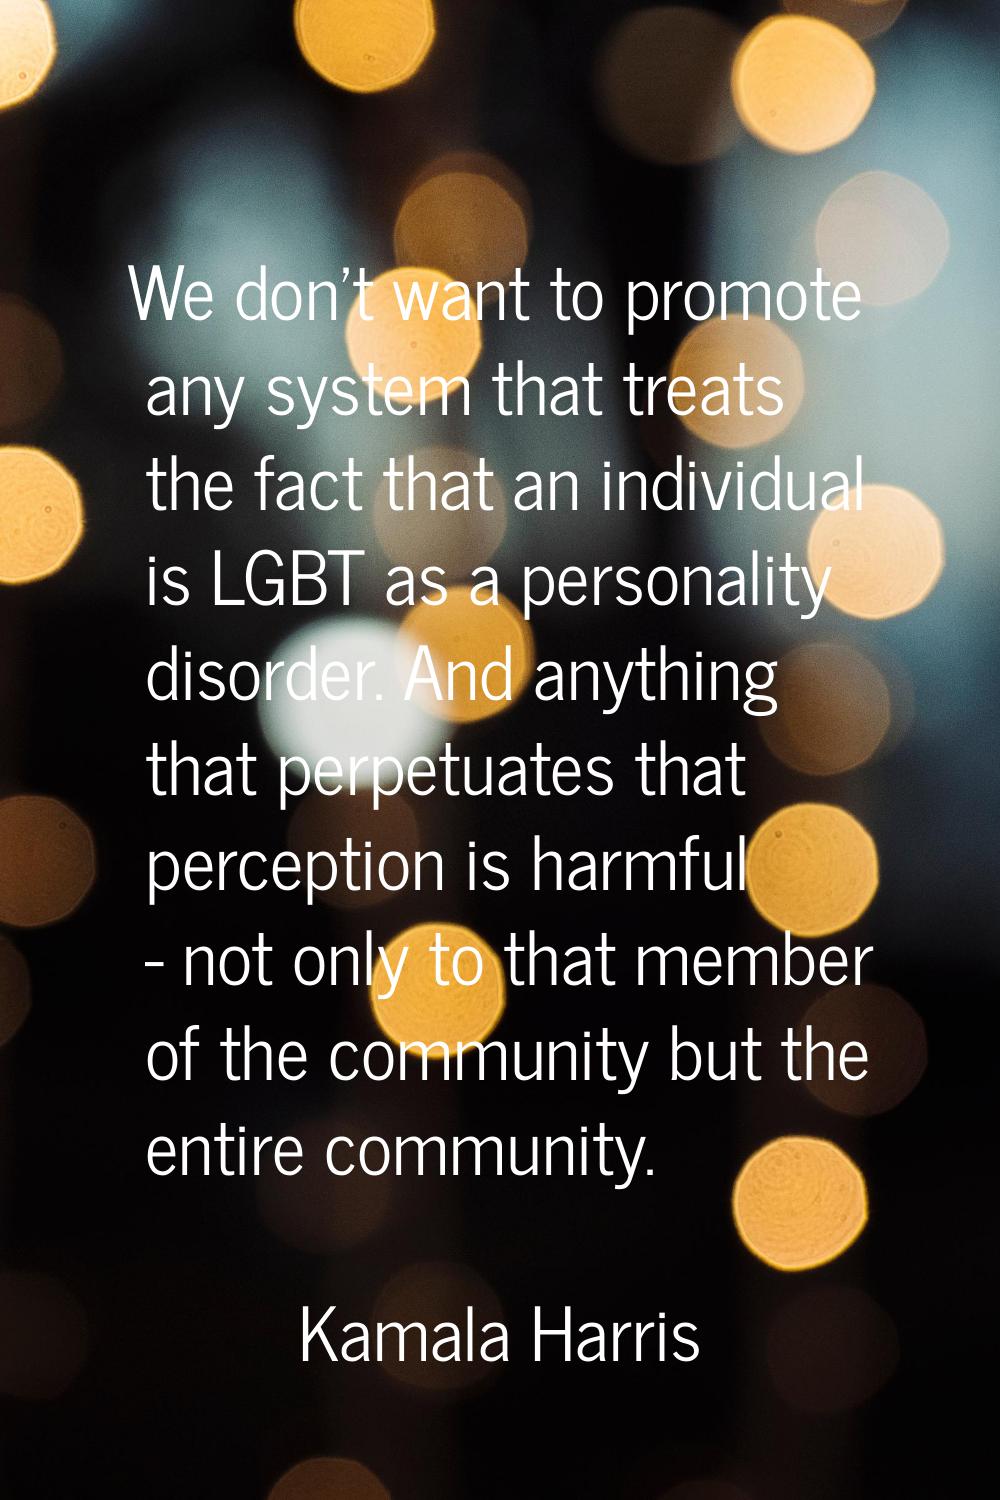 We don't want to promote any system that treats the fact that an individual is LGBT as a personalit